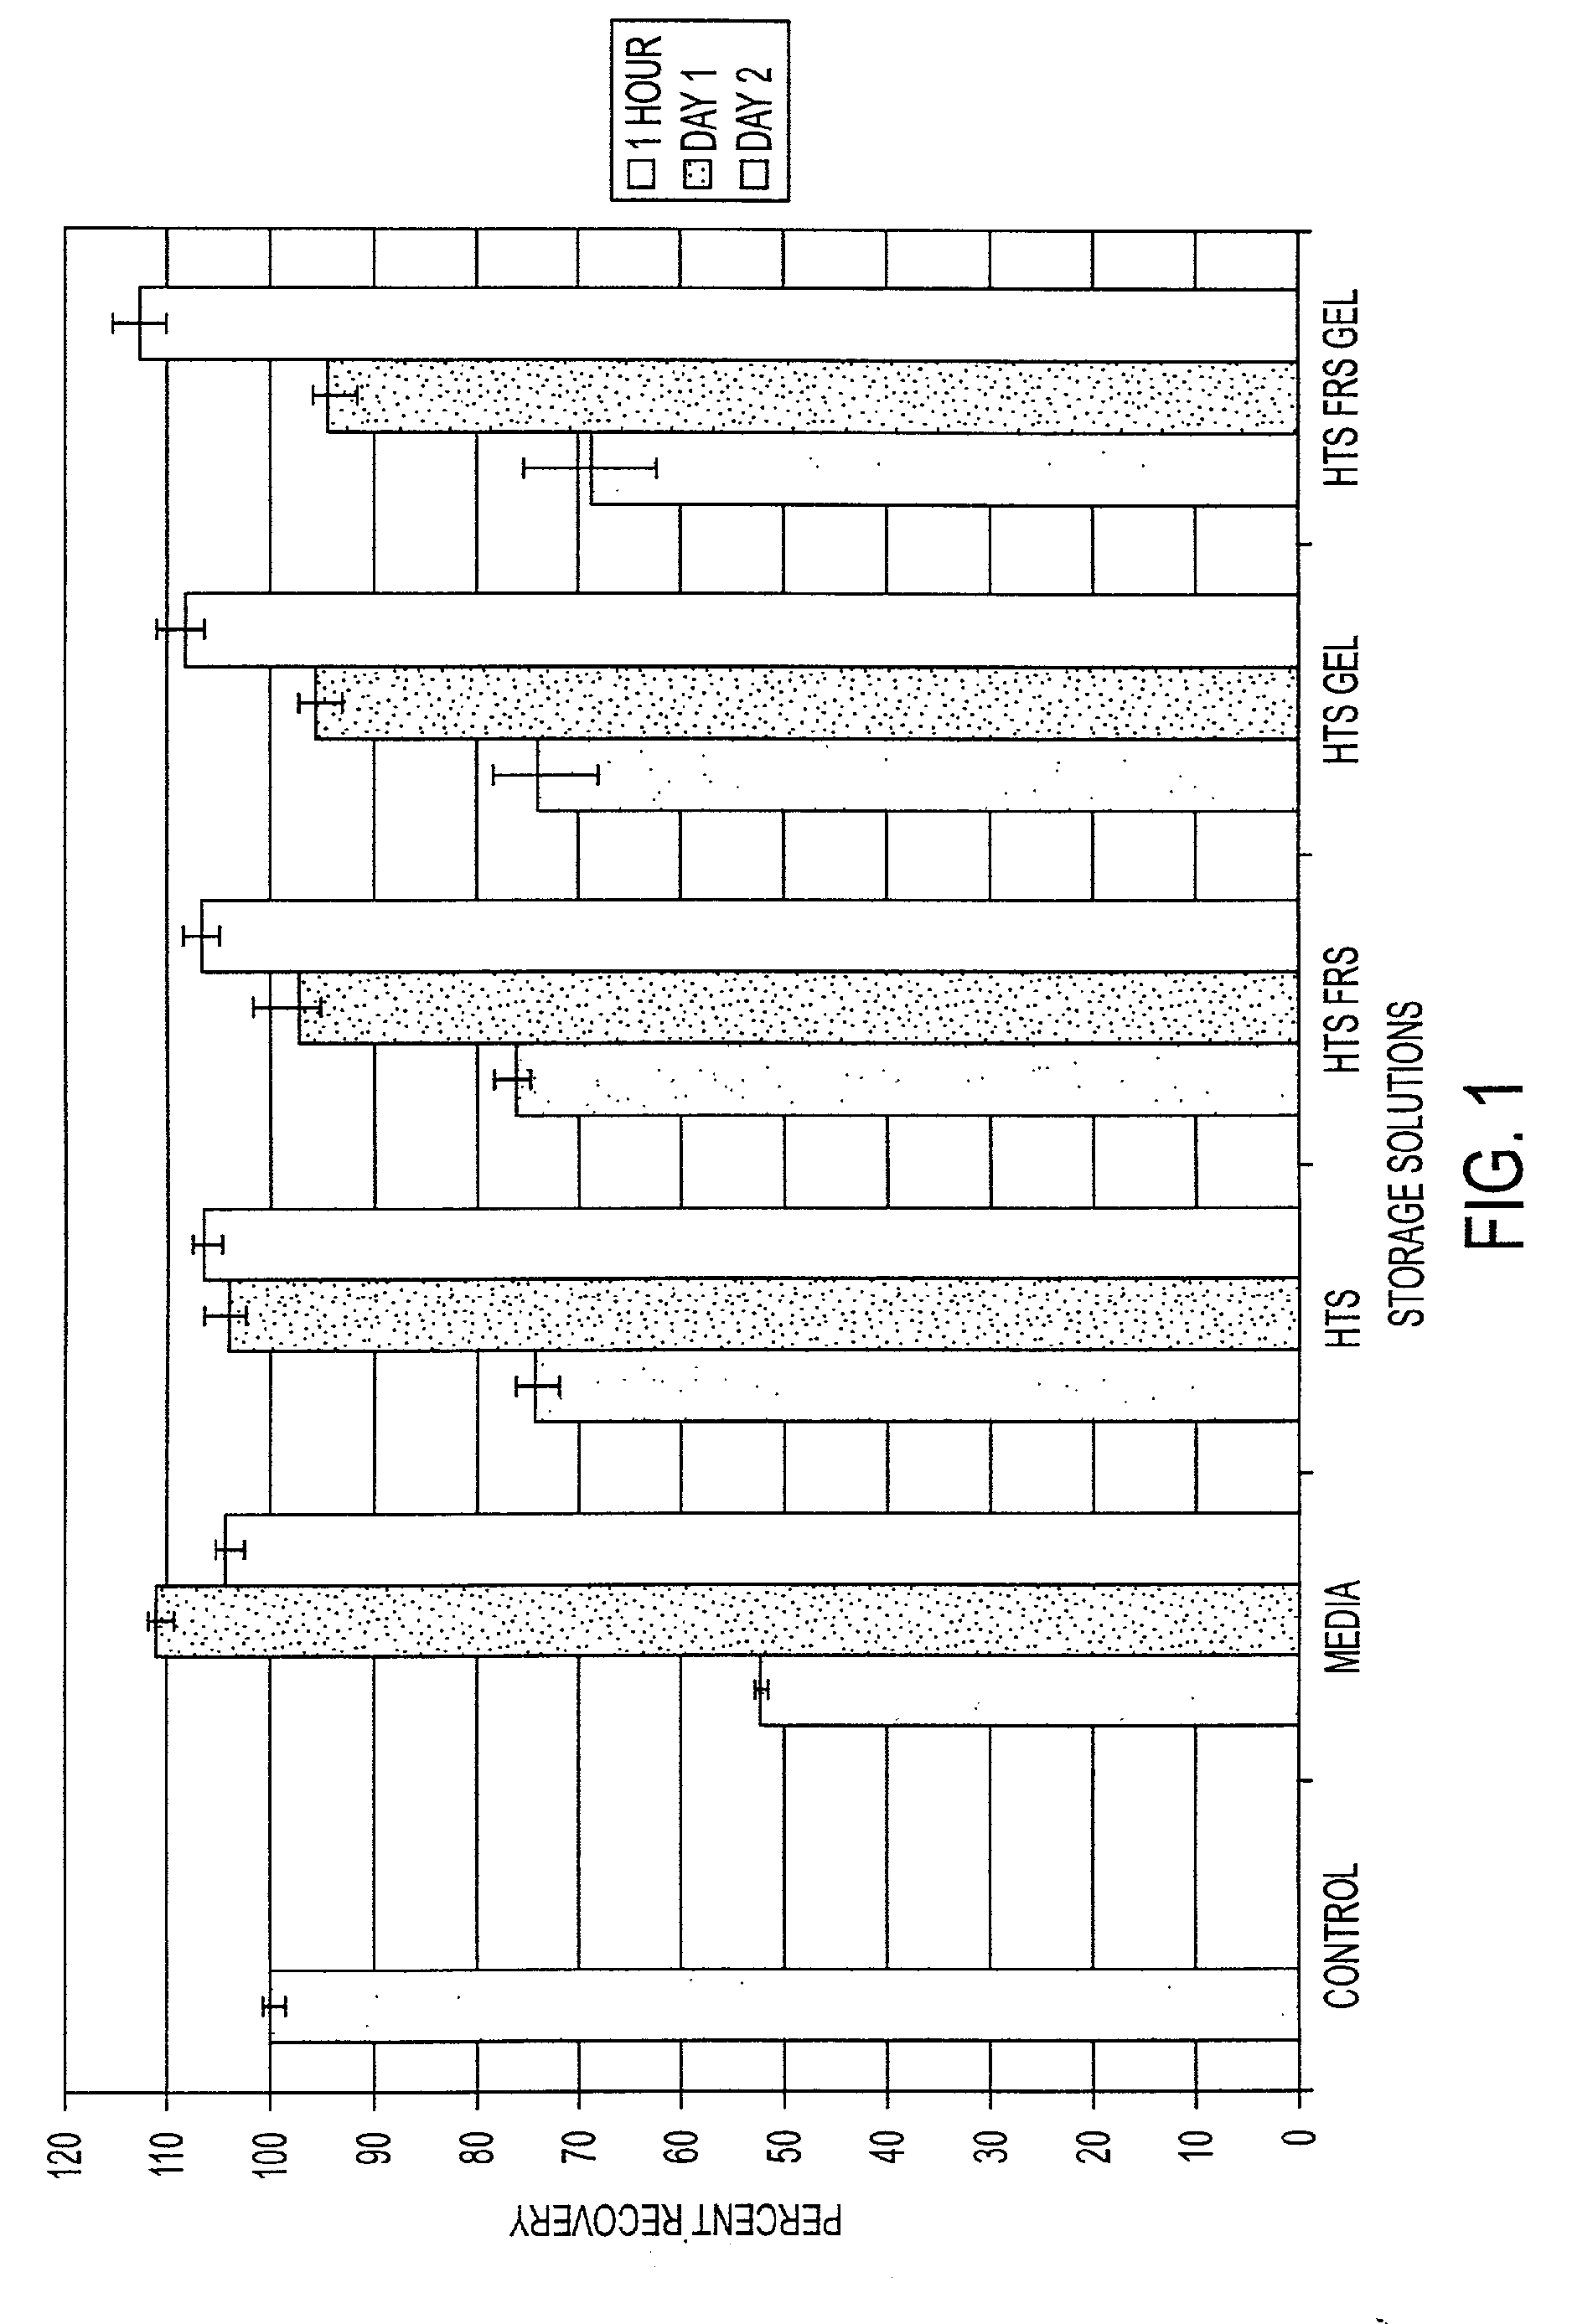 Methods and Compositions for the Control of Molecular-Based Cell Death During Preservation of Cells, Tissues or Organs in a Gel-Like State